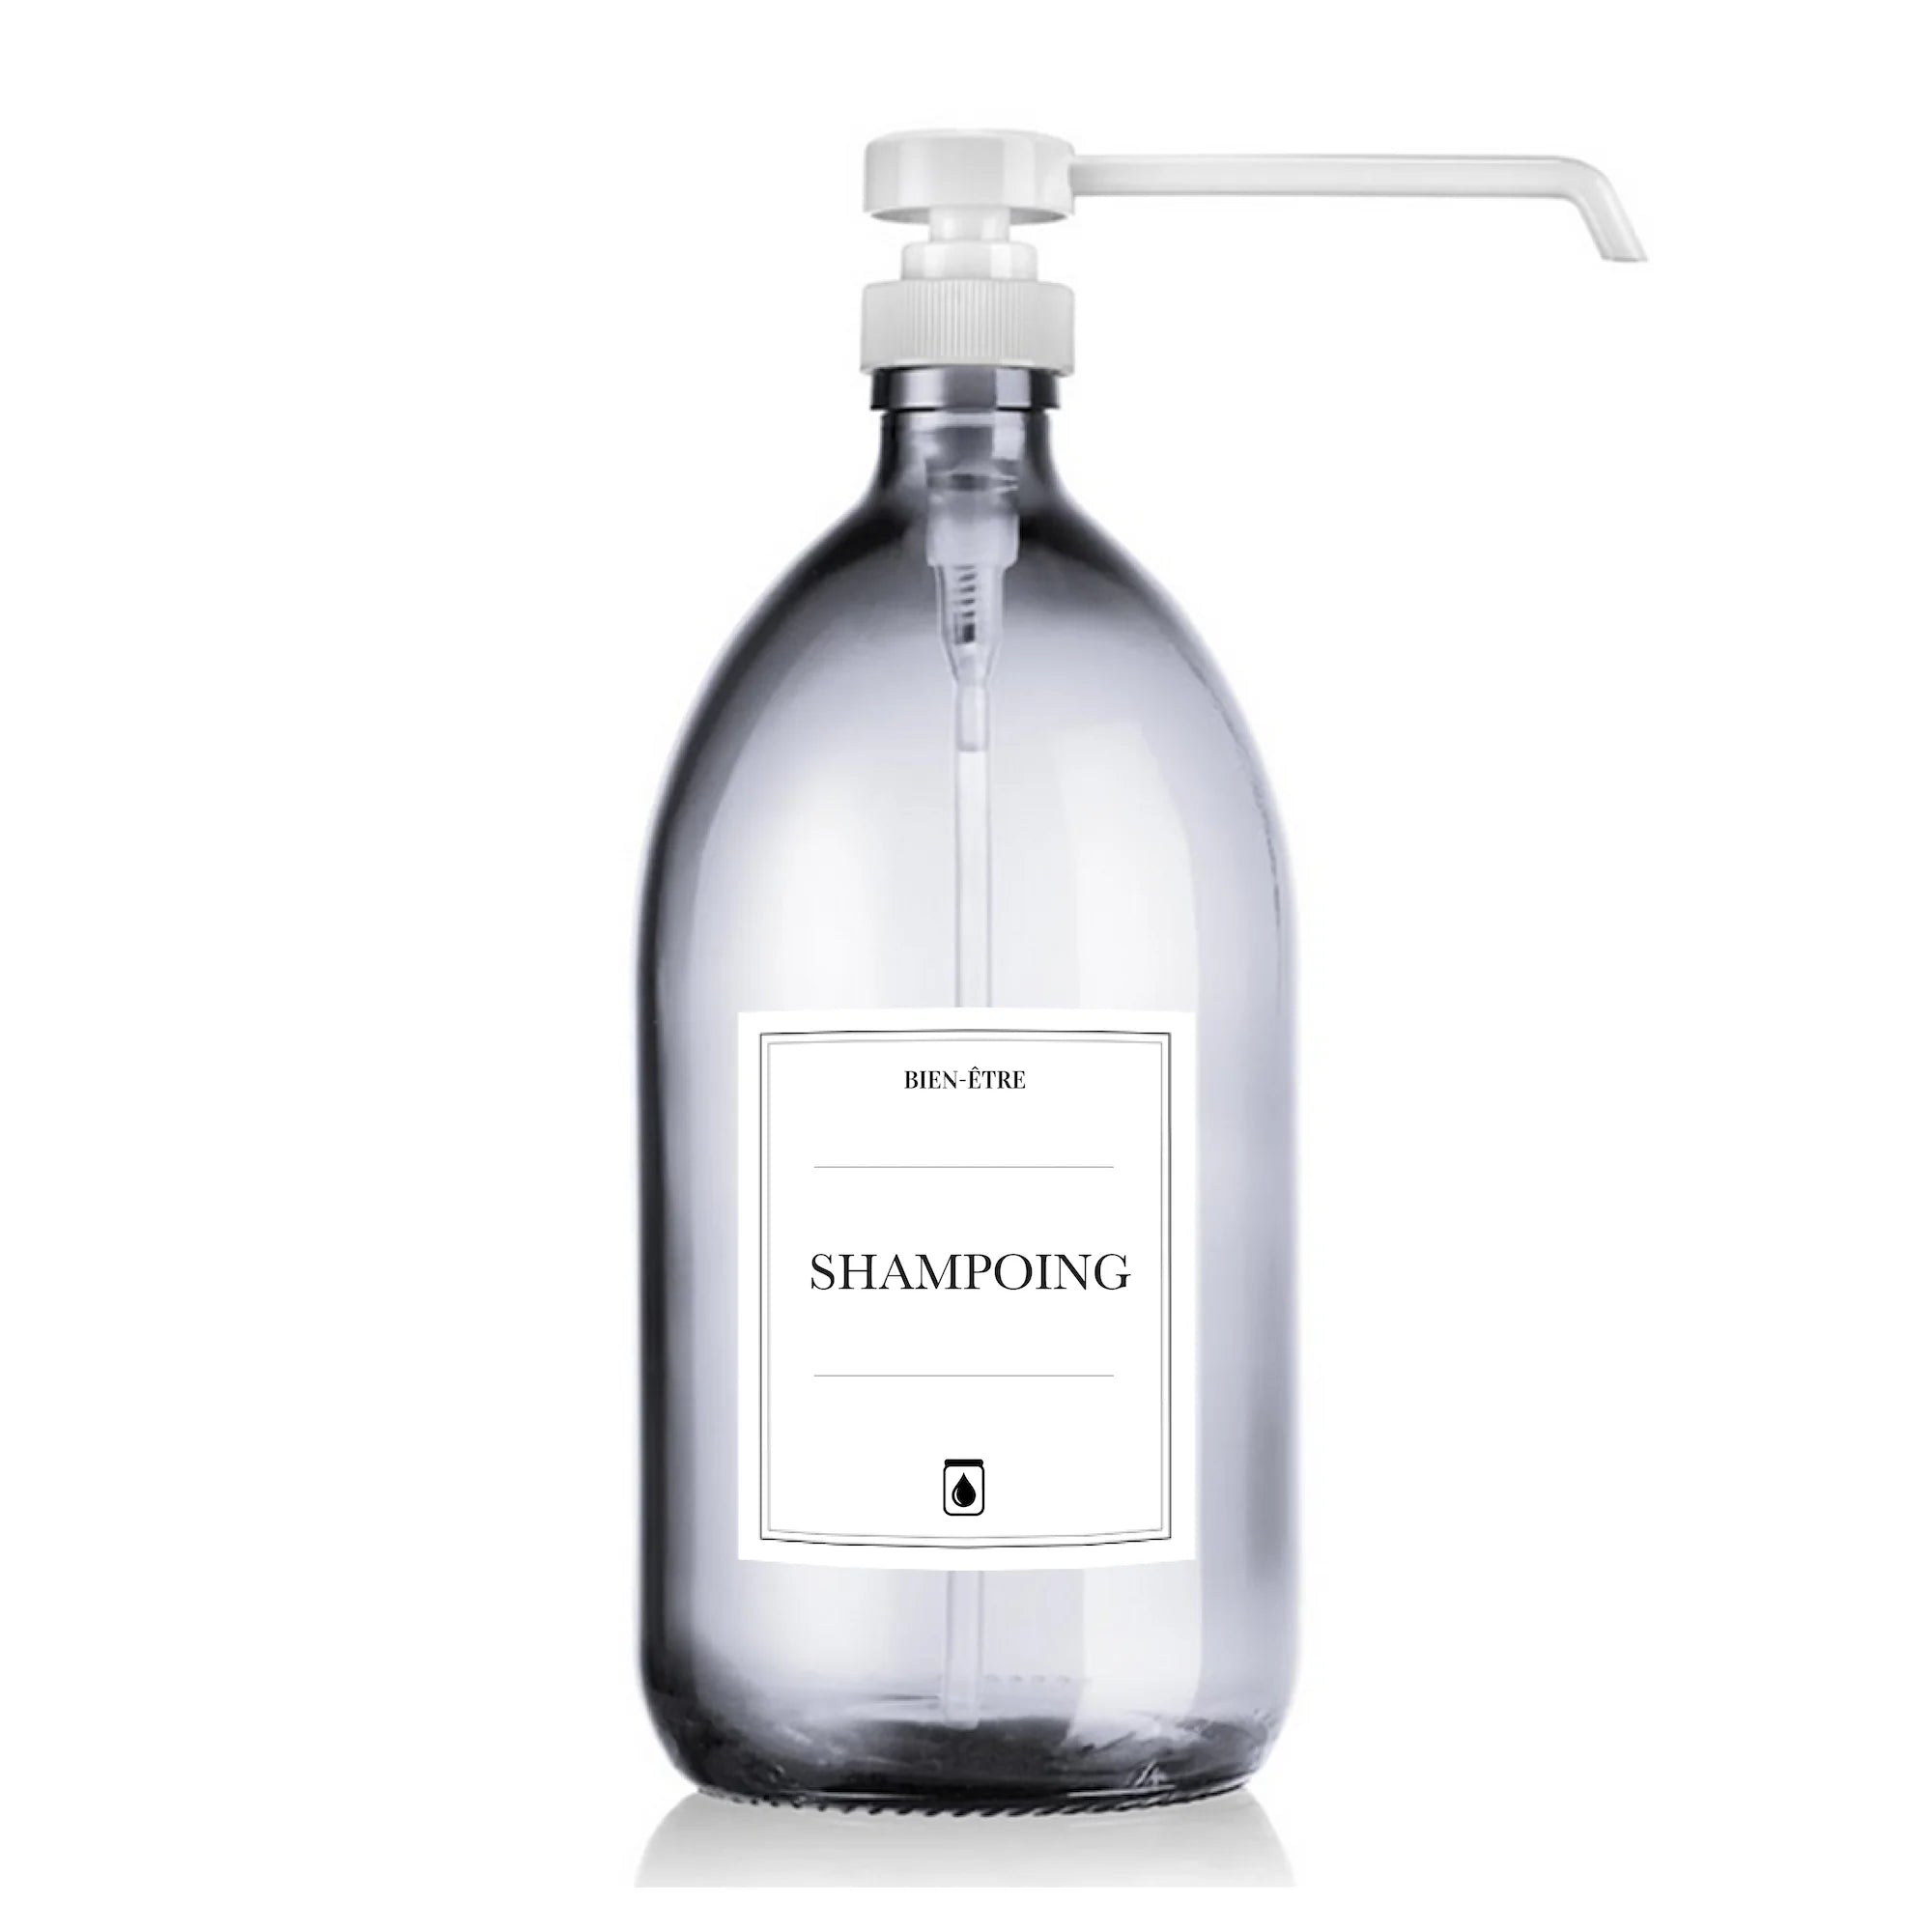 Étiquette SHAMPOING waterproof